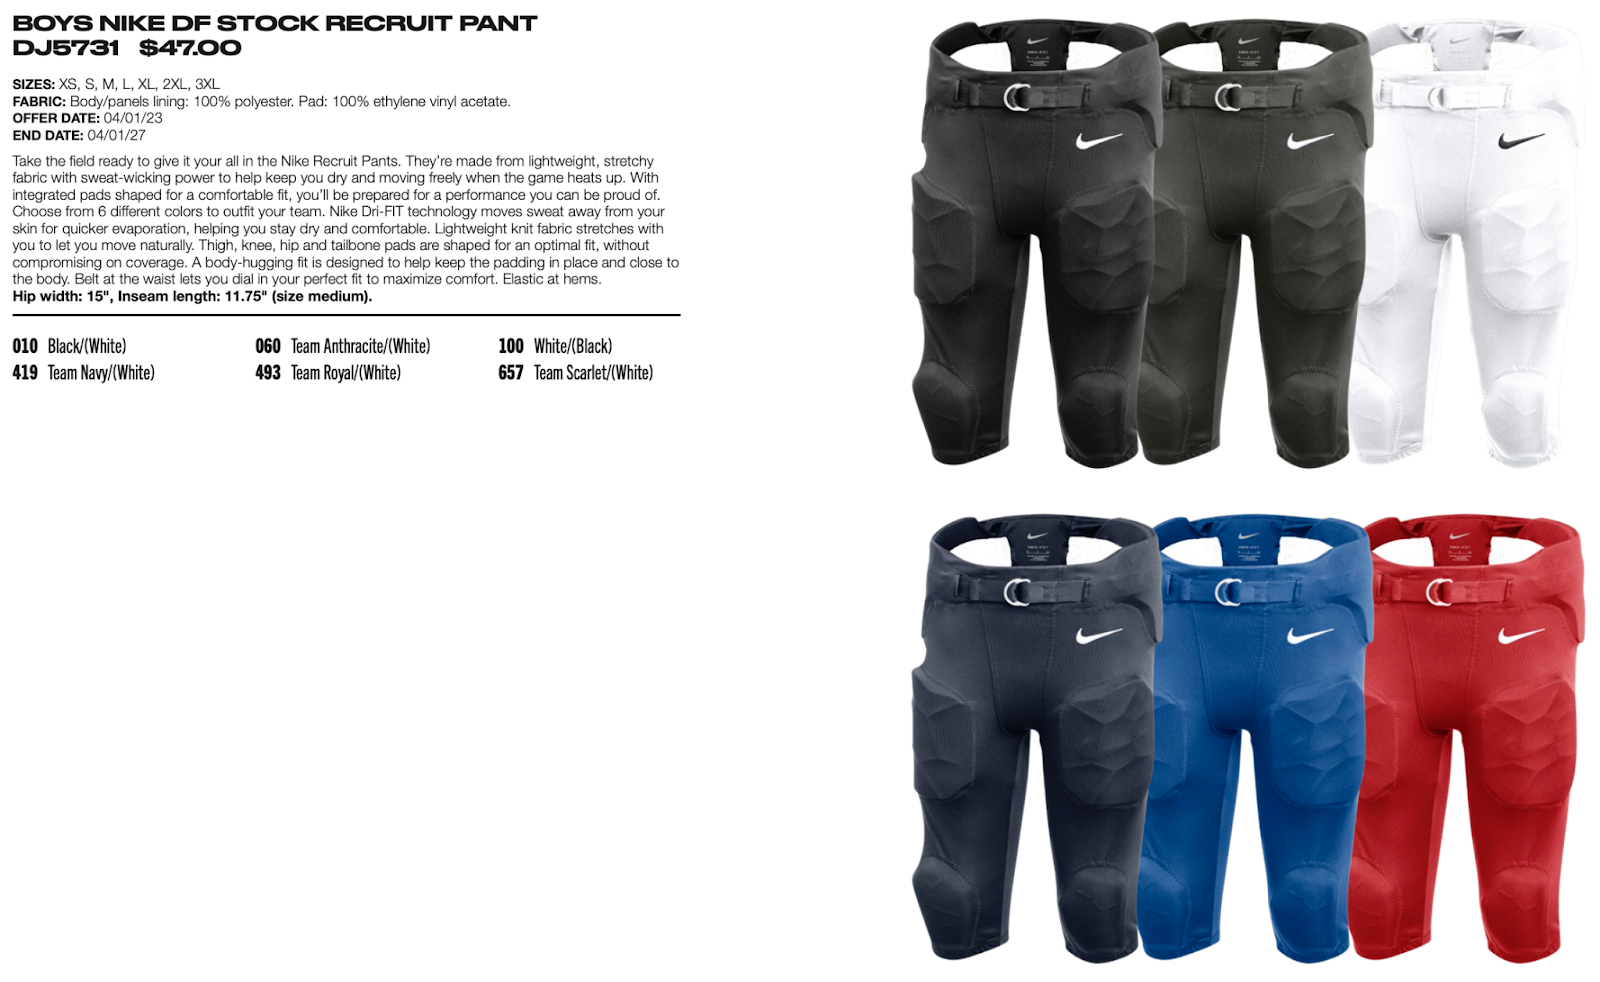 Product display of boys' Nike DF Stock Recruit Pants with sizes, pricing, and various color options highlighted.